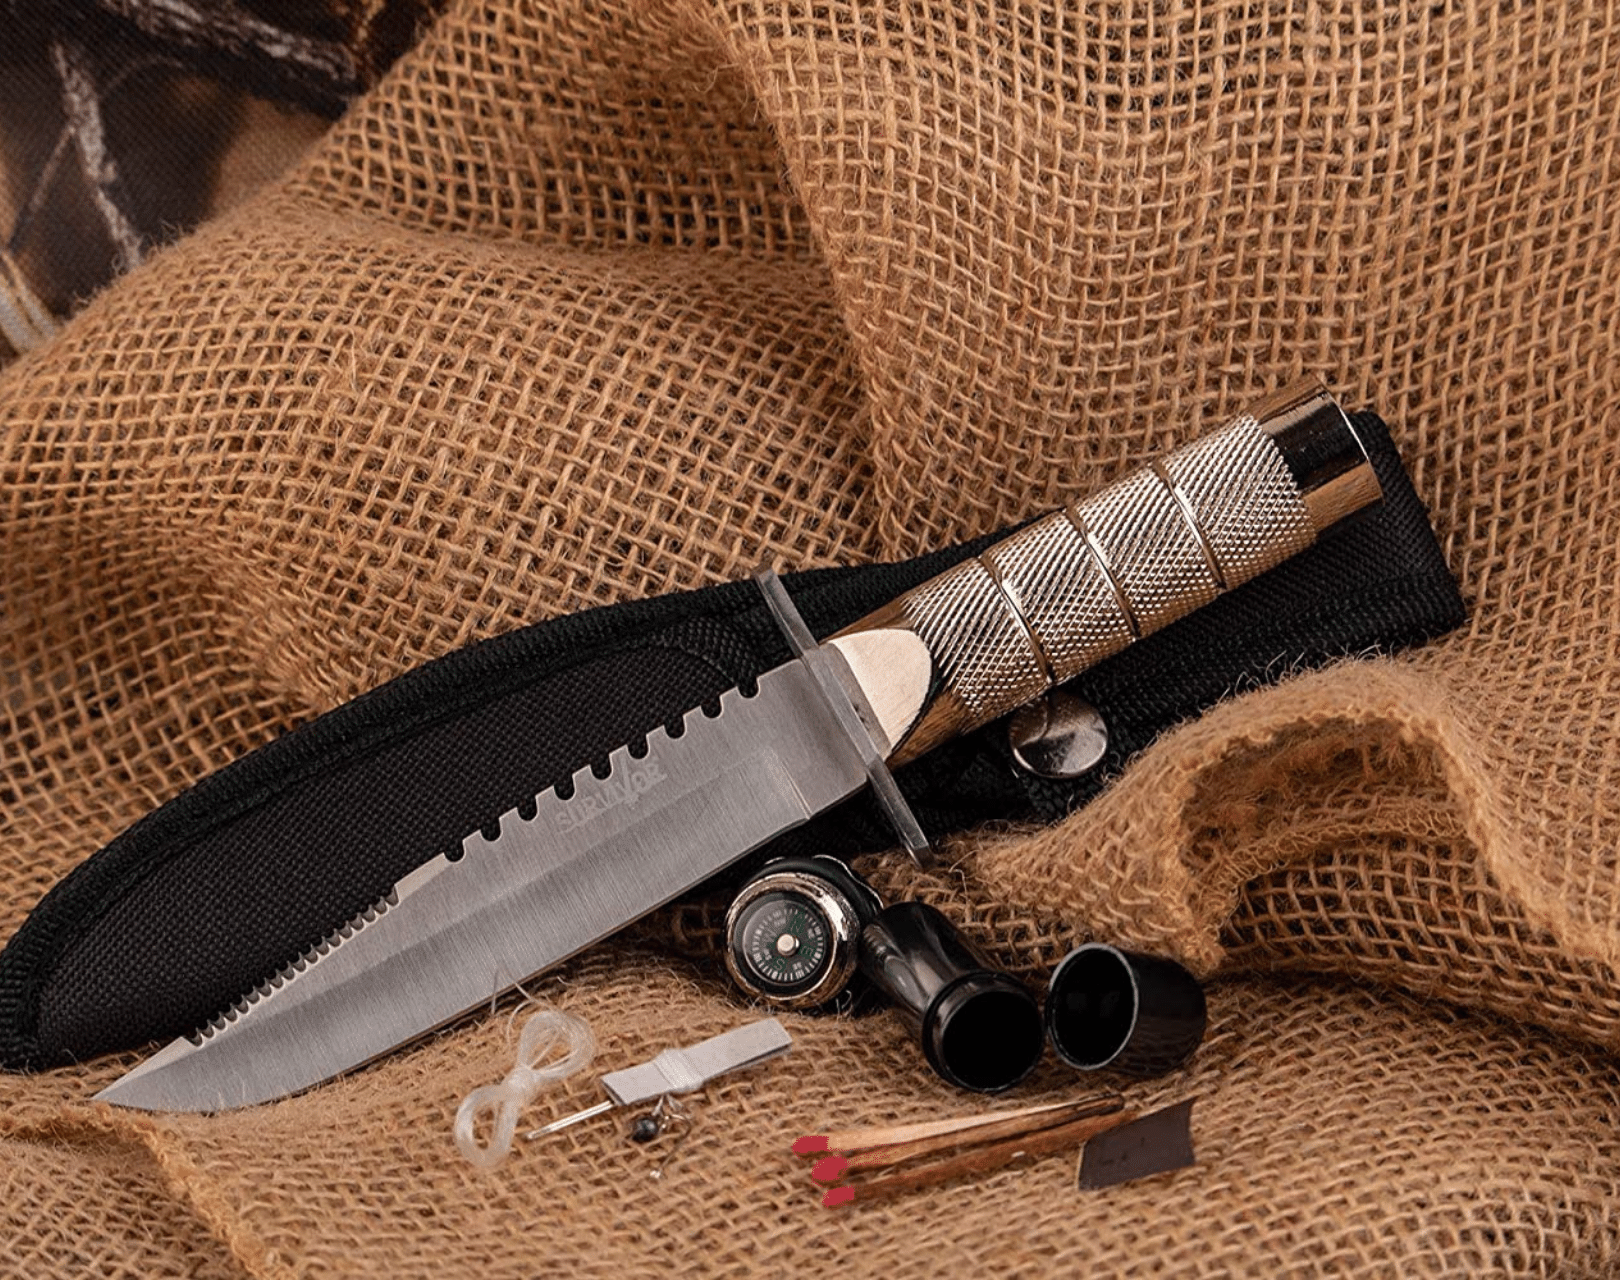 Compass, survival kit, knife blade, a survival knife with matches, fishing line and more.